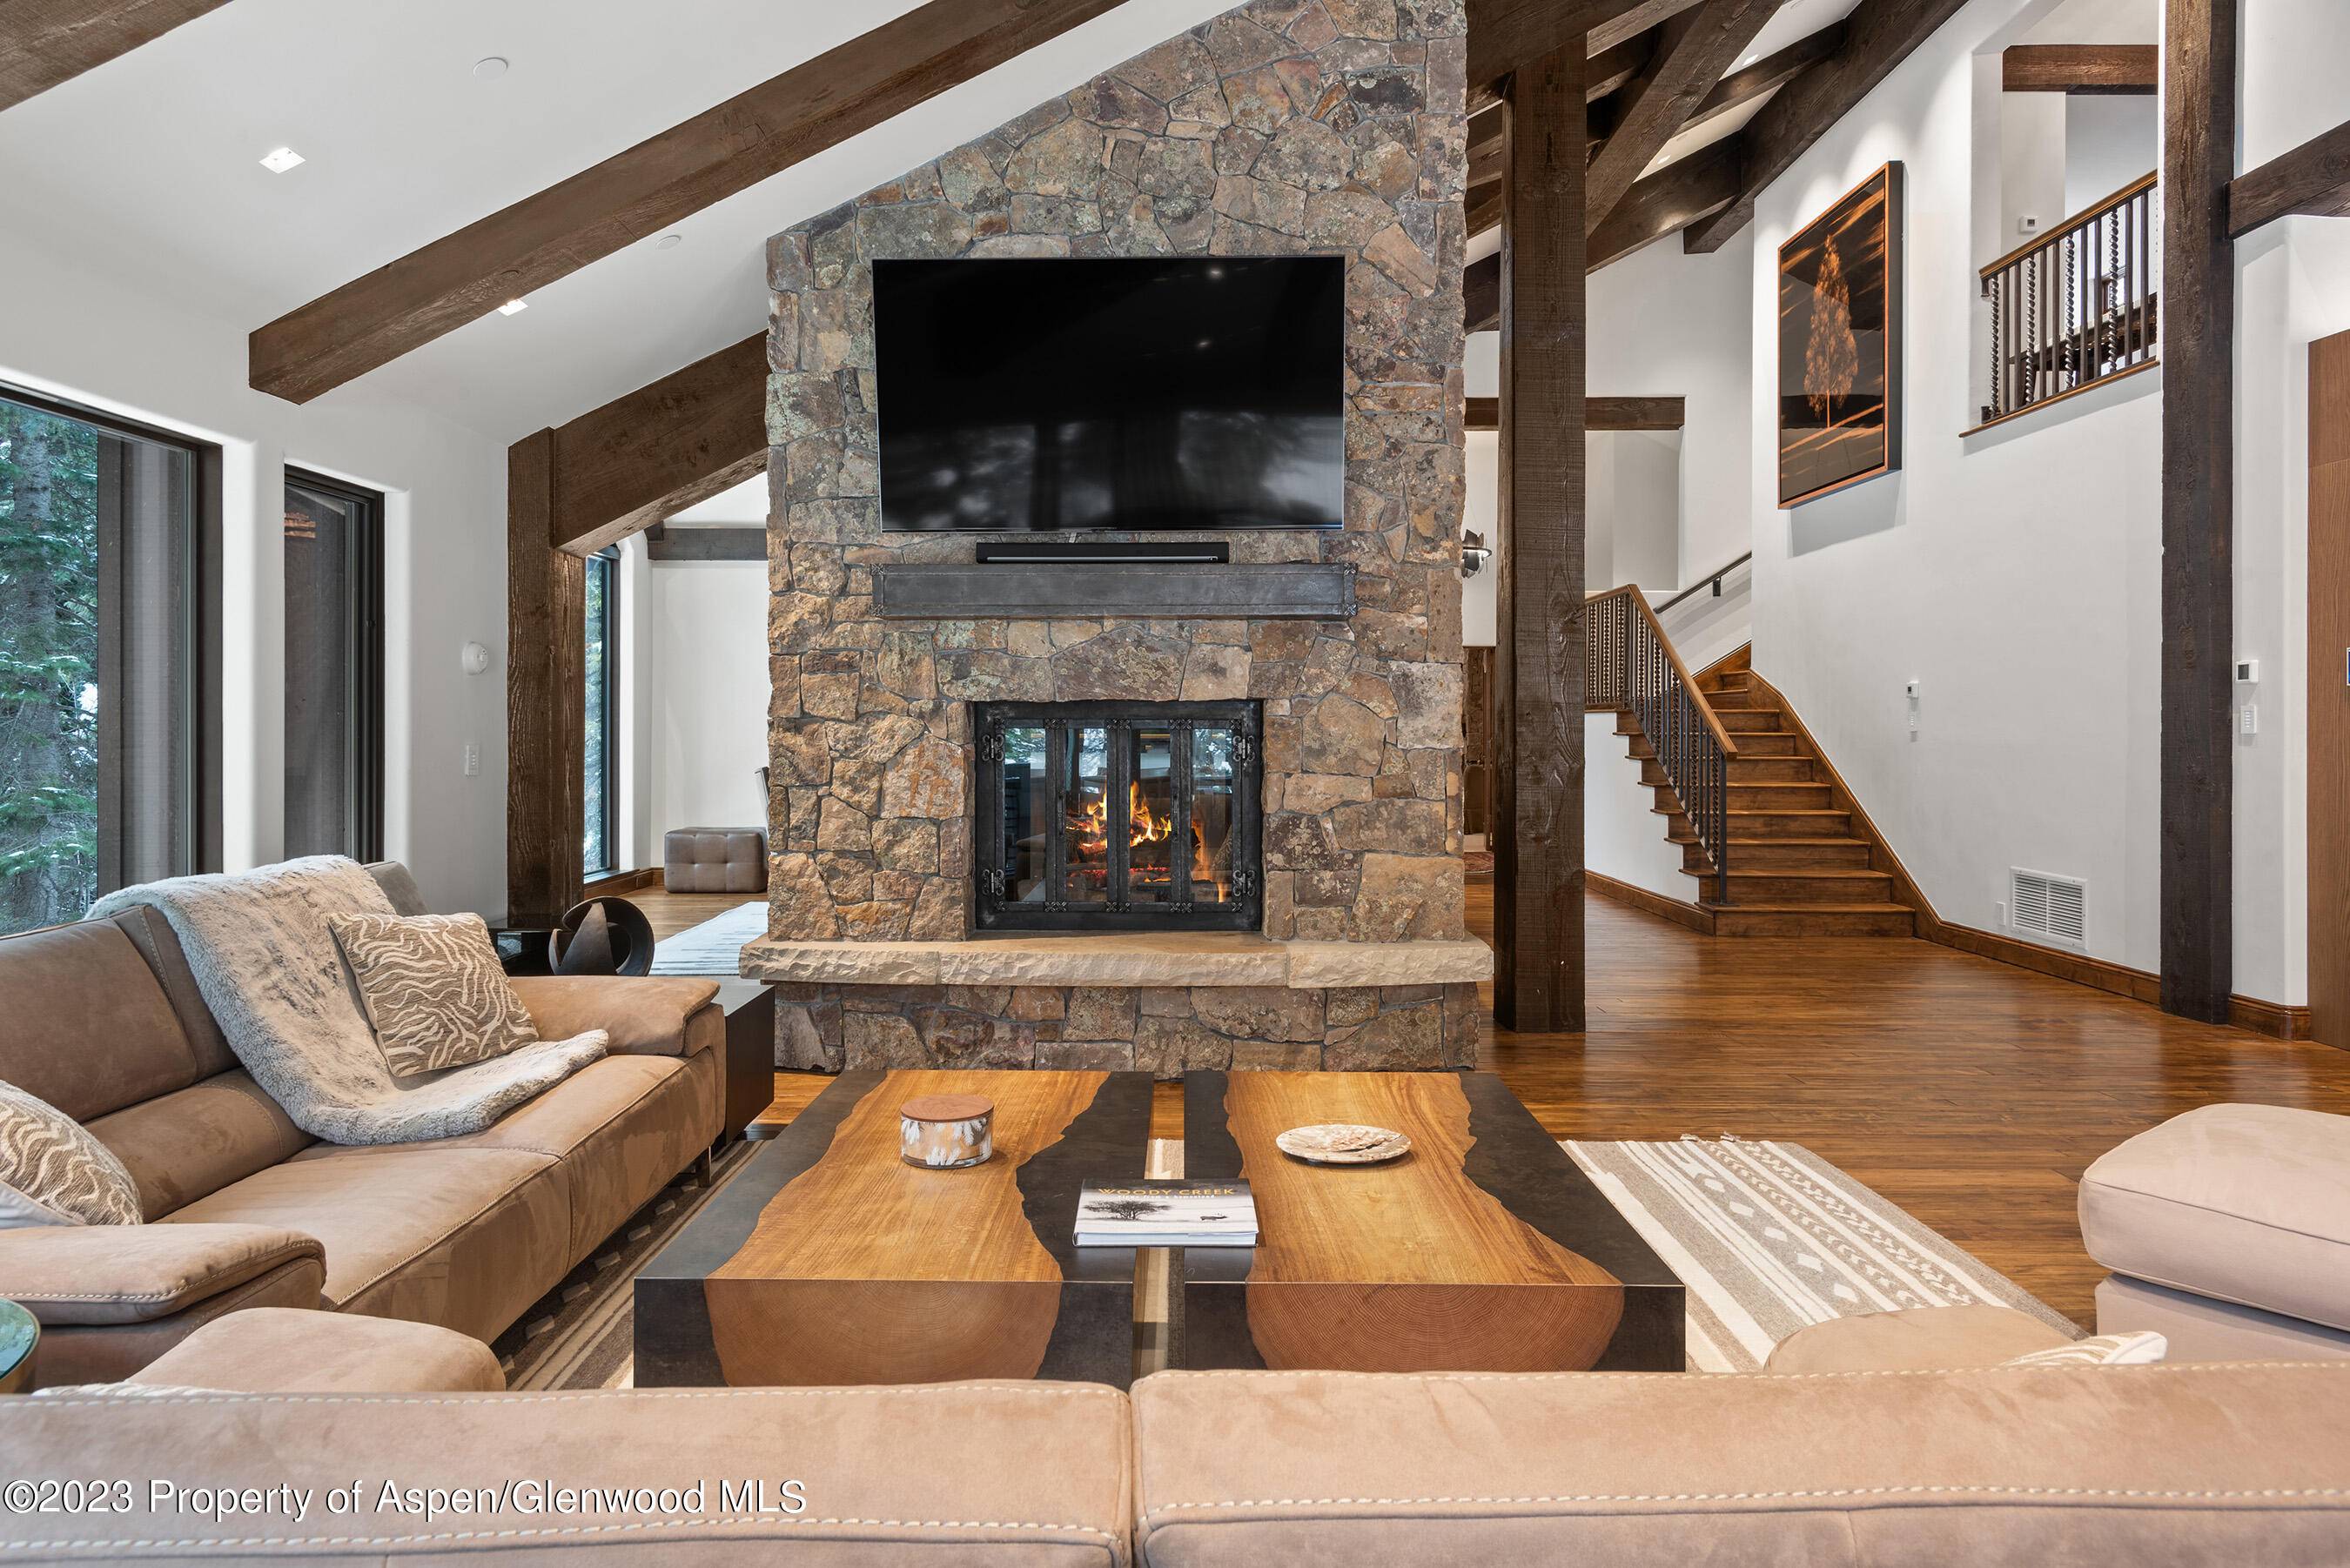 Immerse yourself in the allure of this newly renovated Aspen retreat that seamlessly blends modern elegance with a profound connection to nature.